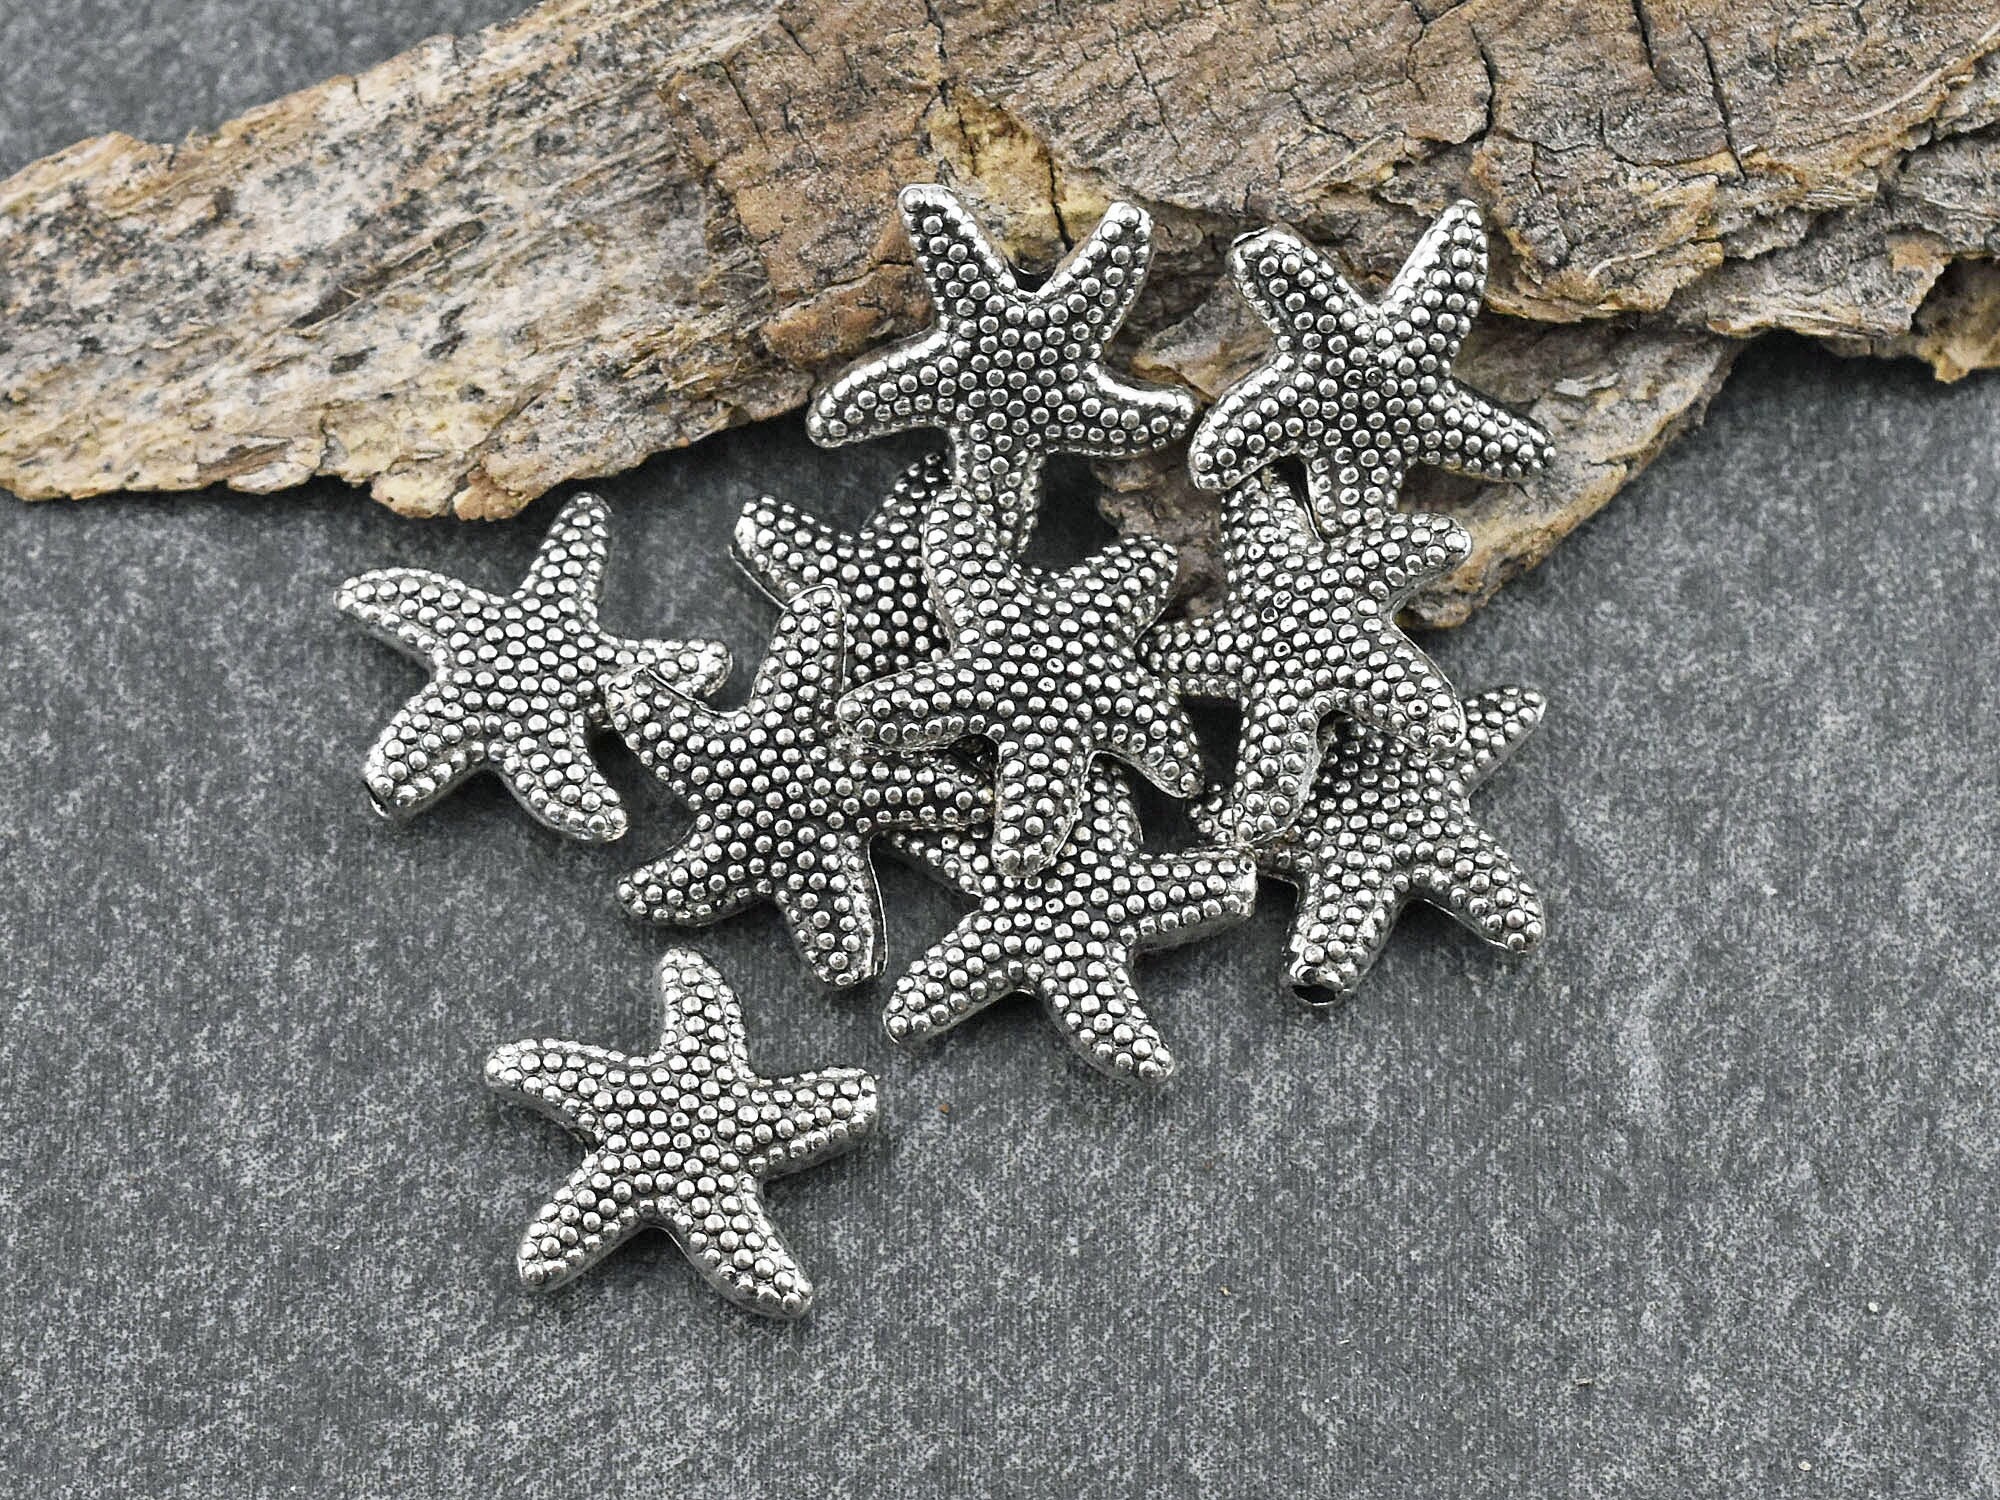 144~156Pcs Waterproof Synthesis Turquoise Beads Bulk Starfish Beads for  Jewelry Making 